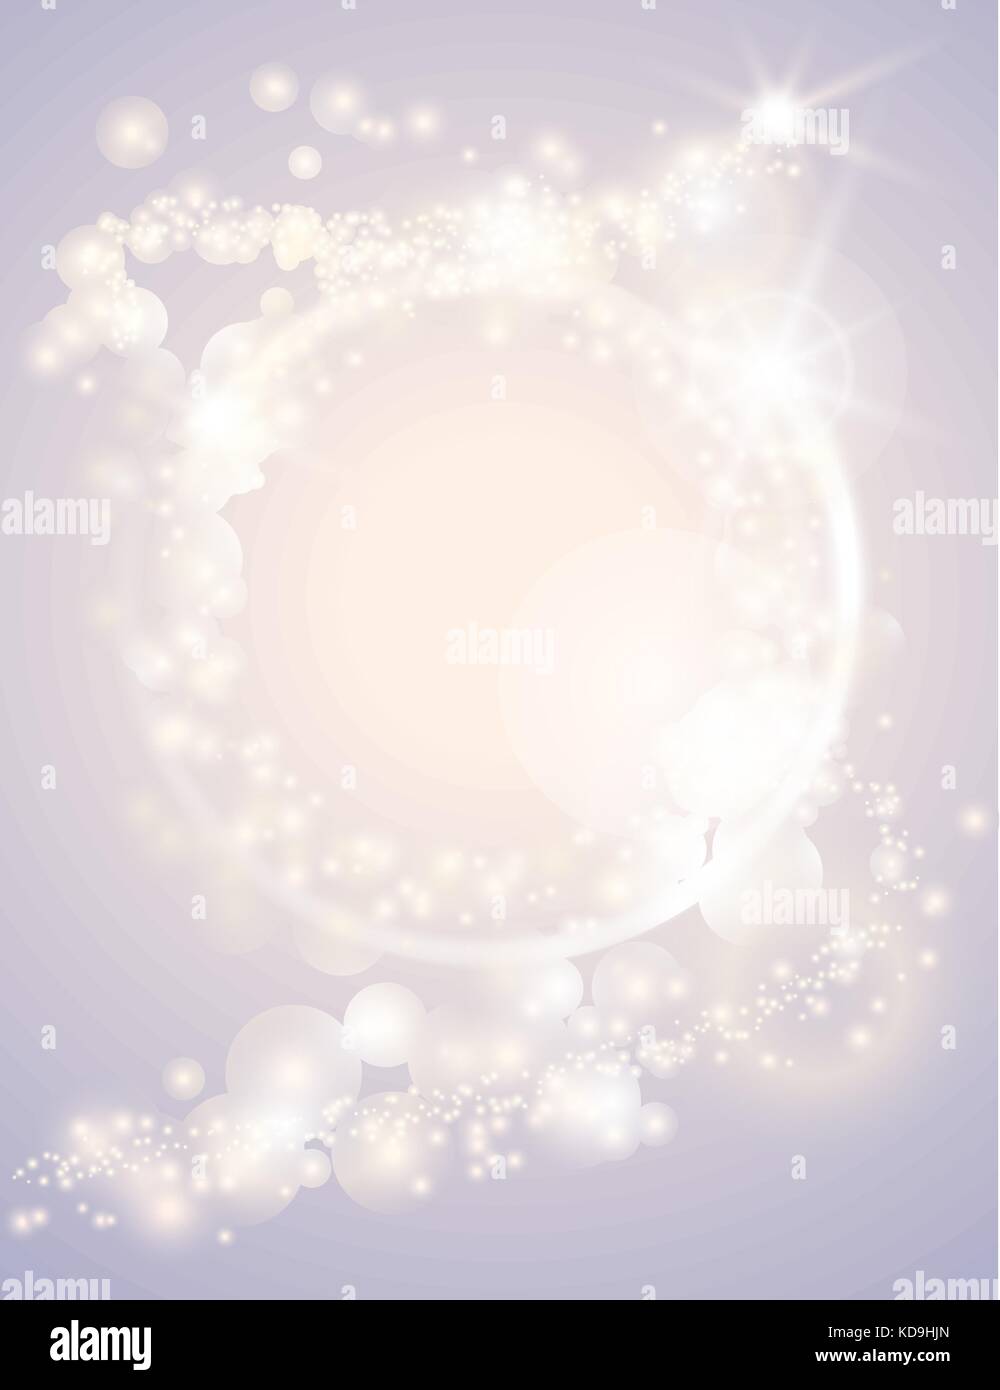 Abstract glow light spark circle frame bright Christmas background. Sparkling festive design poster. Glitter magic round border. Fantasy greeting card Stock Vector